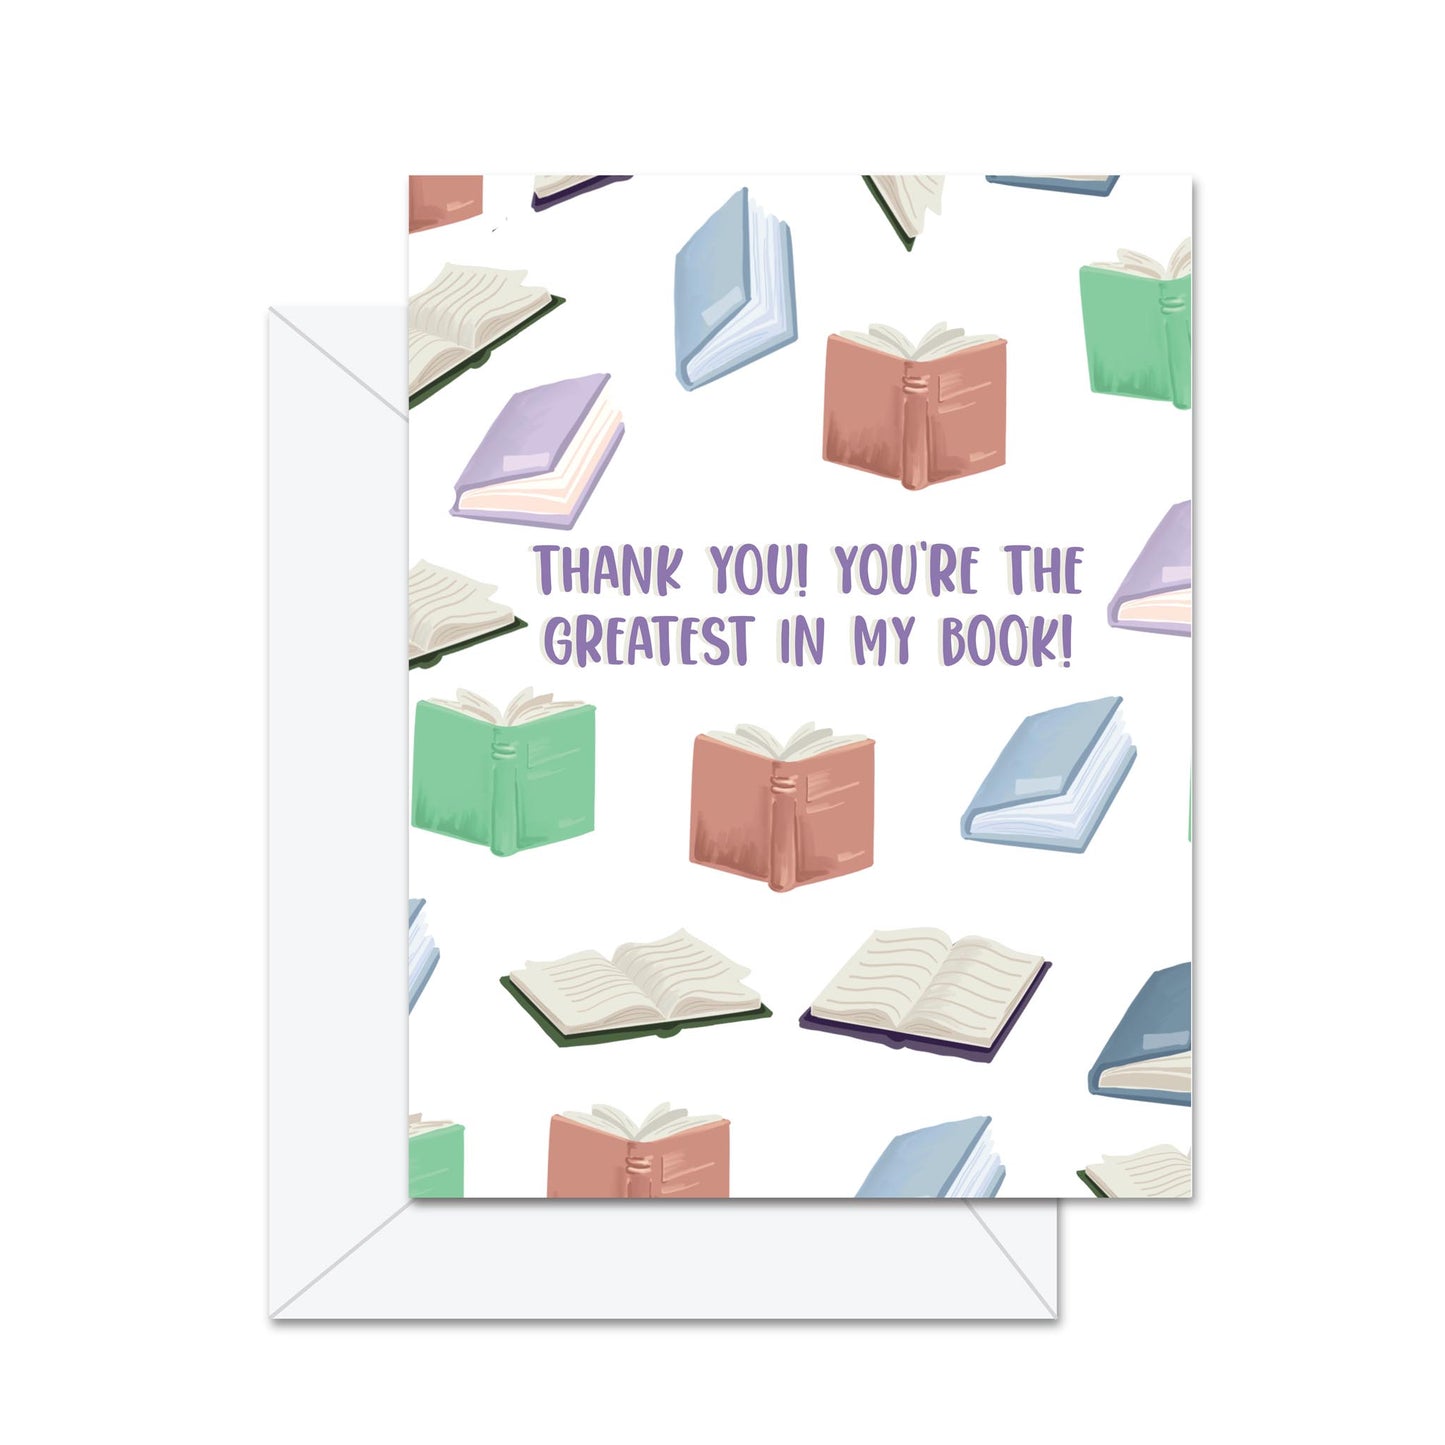 Thank You! You're The Greatest In My Book! - Greeting Card